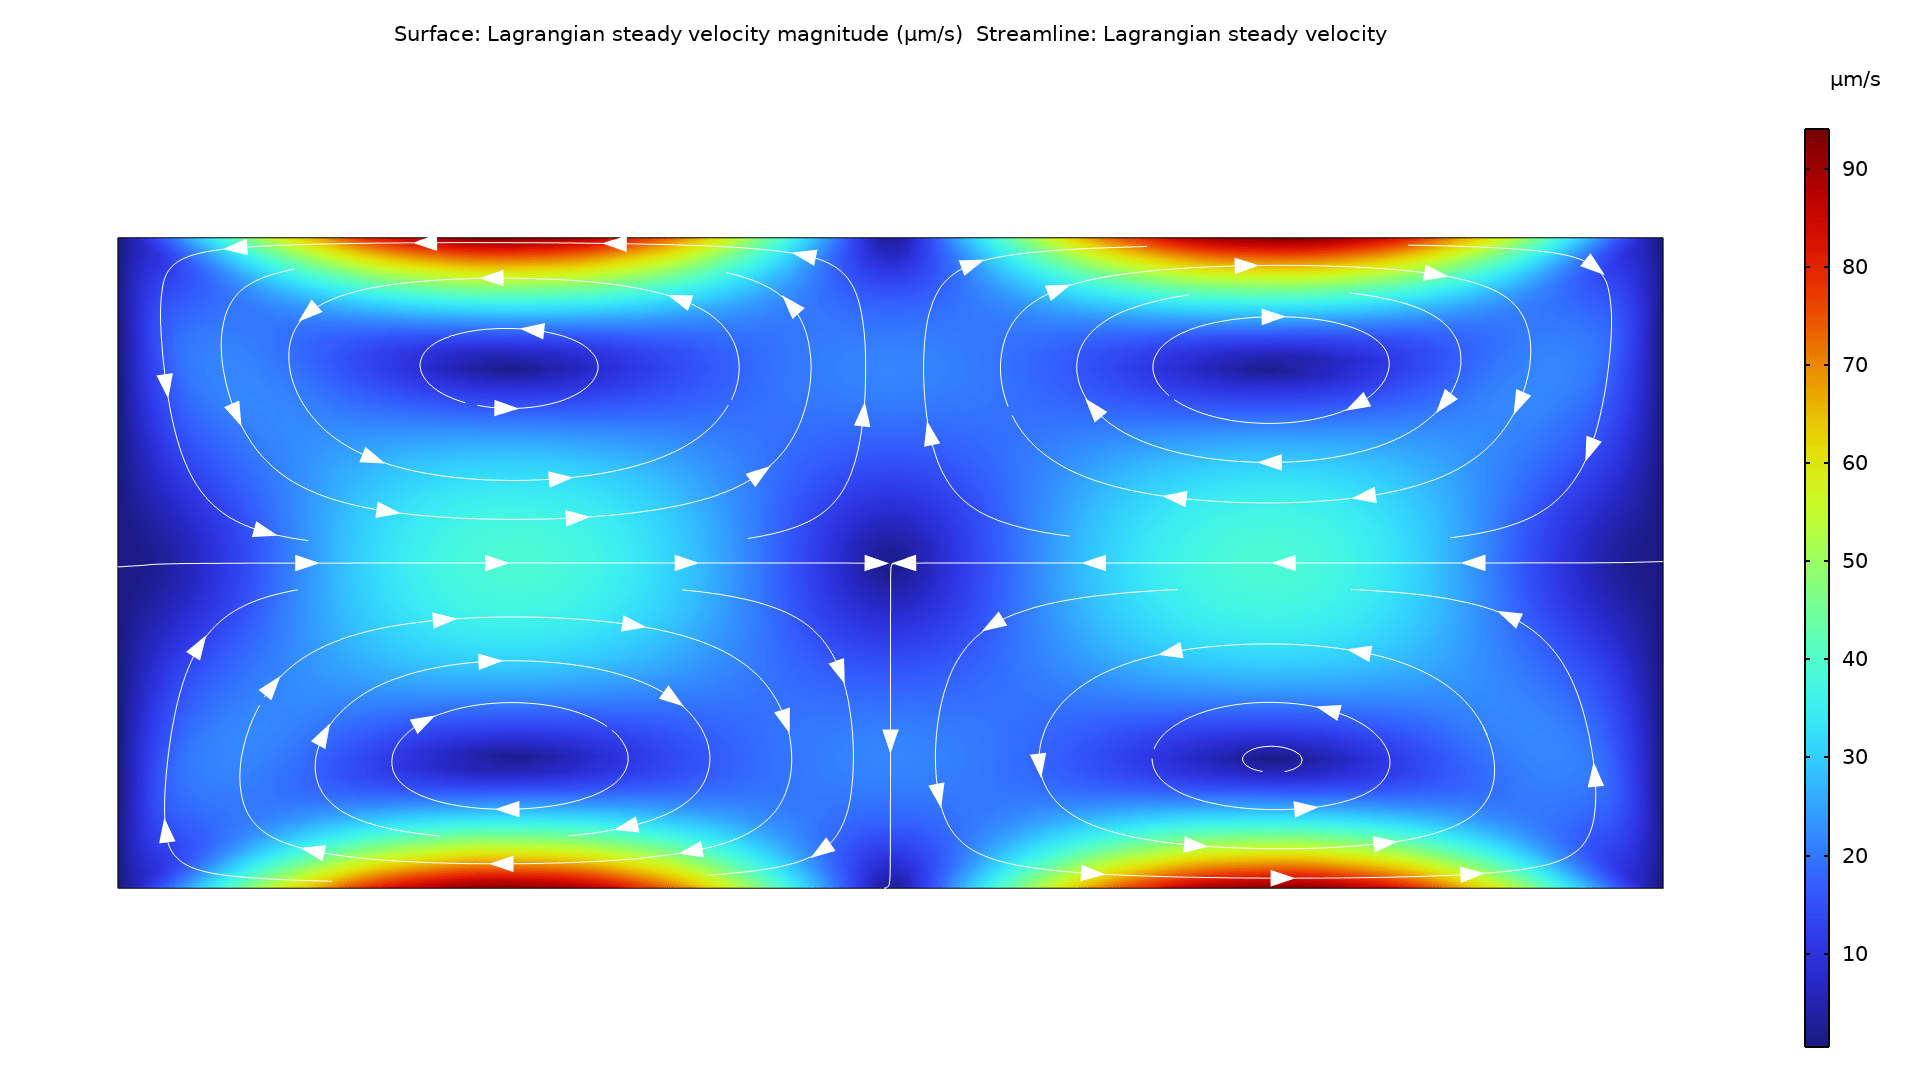 A cross section of a microchannel model showing the acoustic streaming trajectory in the Rainbow color table.